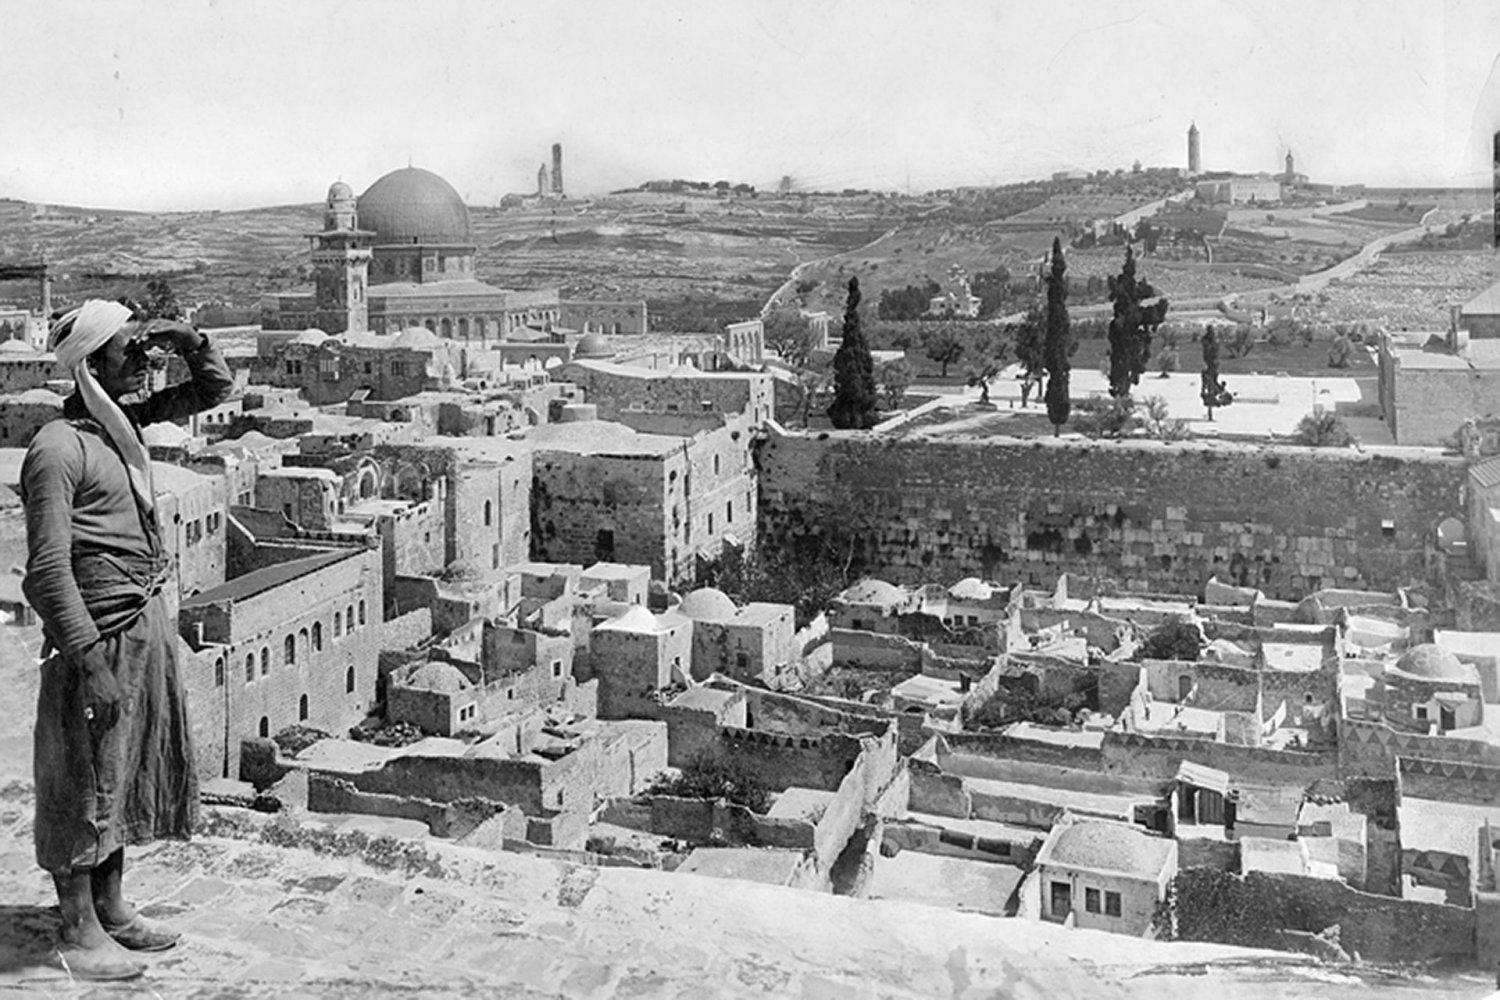 A man stands on a rooftop overlooking the Moroccan Quarter, with the Western (al-Buraq) Wall visible, 1917